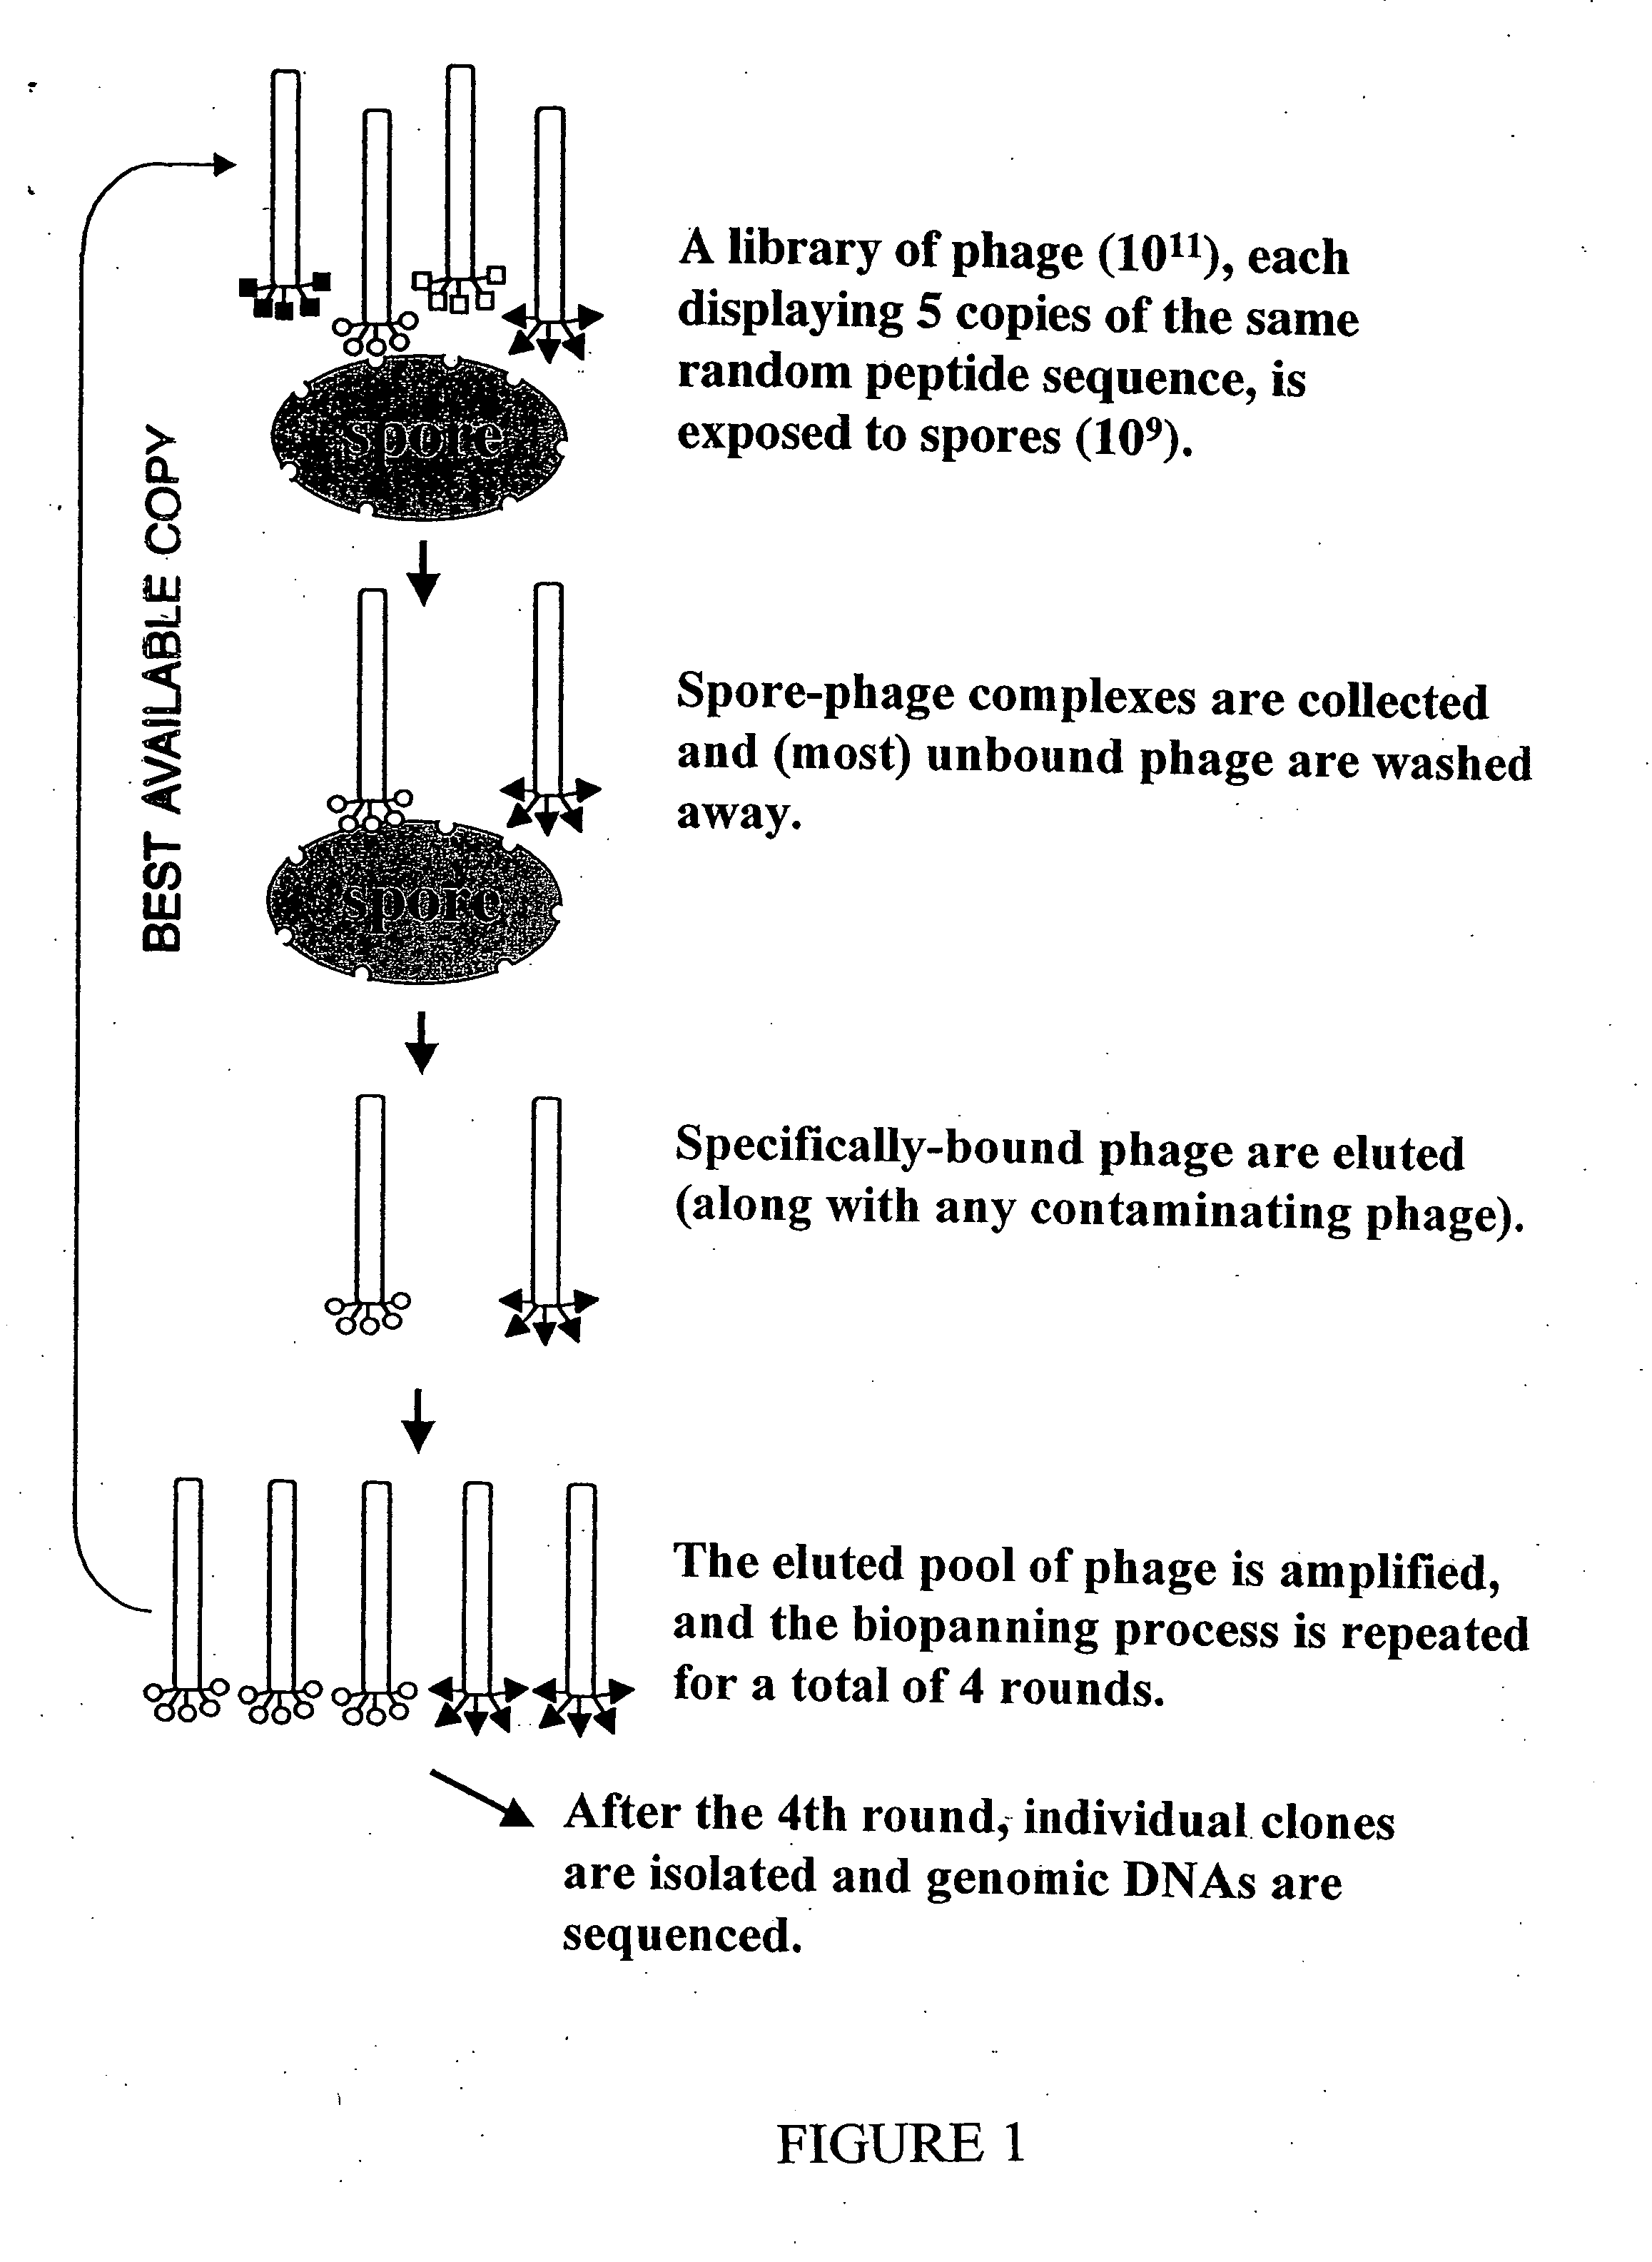 Monoclonal antibodies specific for anthrax spores and peptides derived from the antibodies thereof